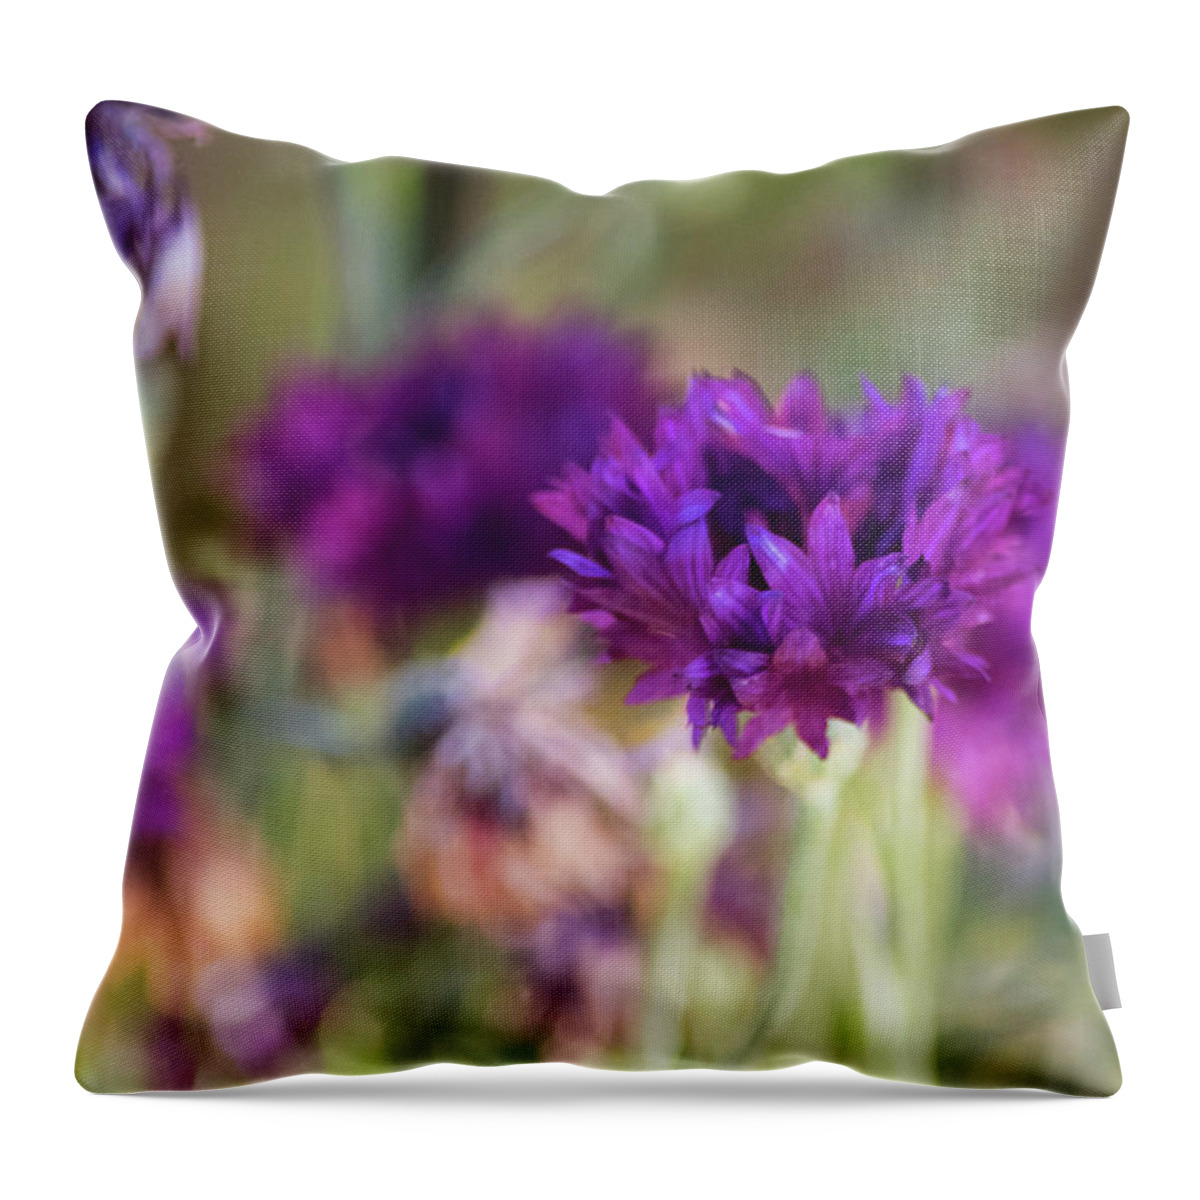 Purple Flowers Throw Pillow featuring the photograph Chive Blossoms by Bonnie Bruno